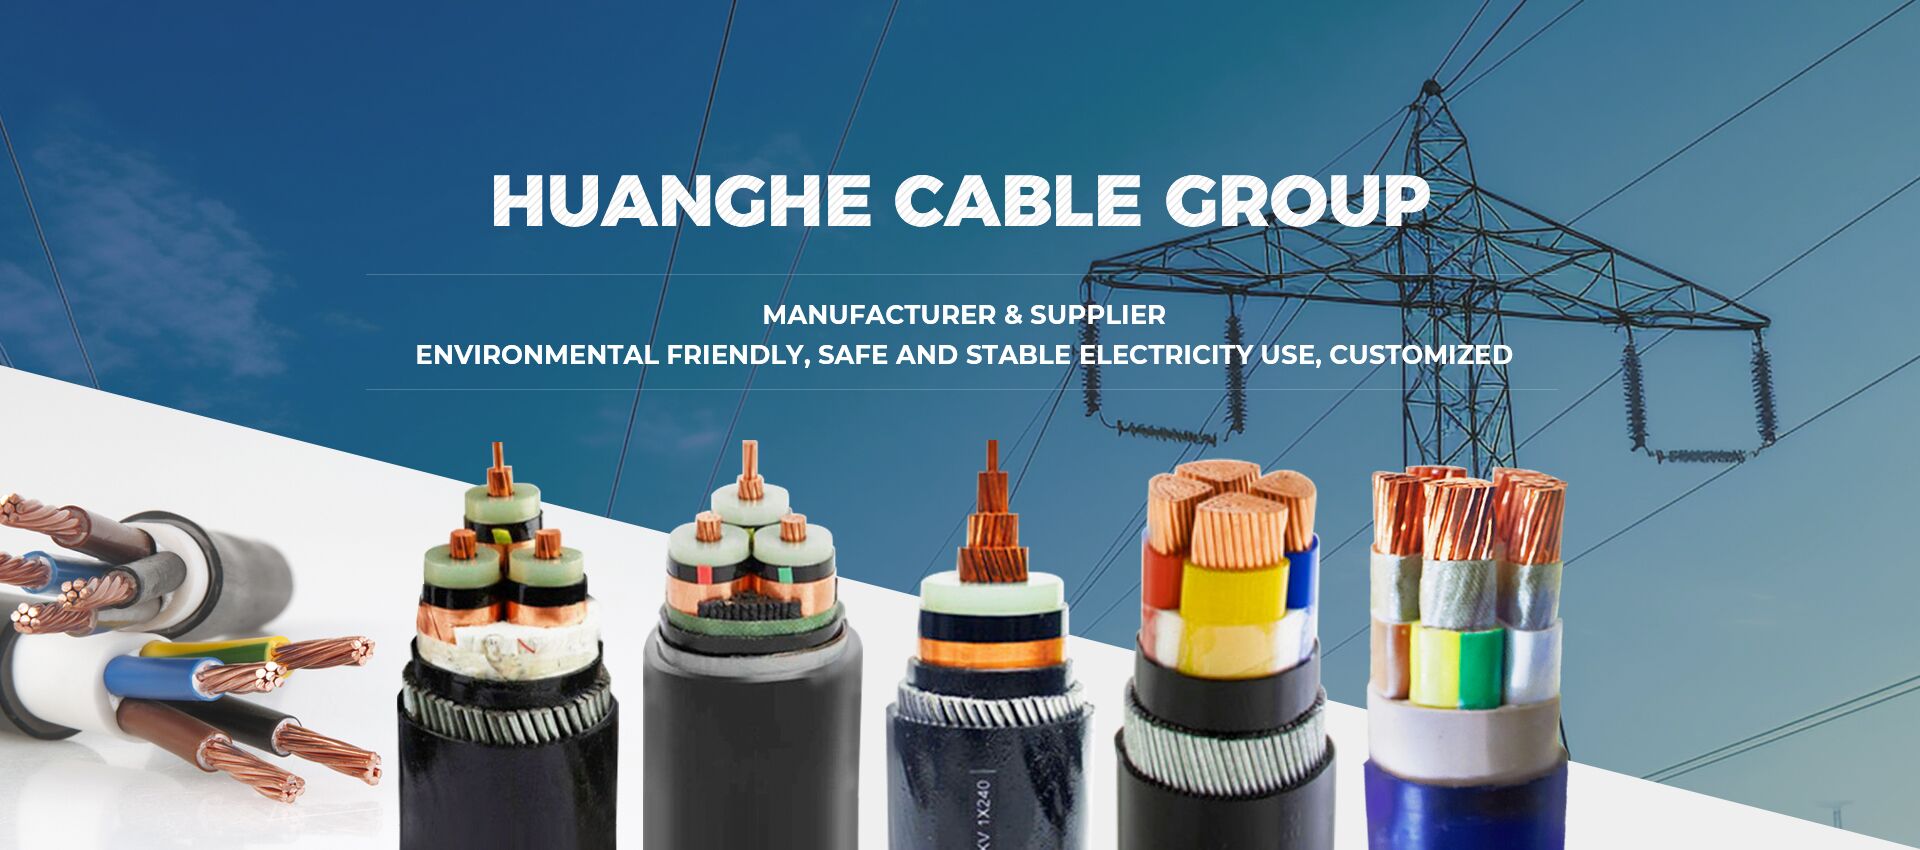 Huanghe Cable Group, Henan Interbath Cable Co., Ltd